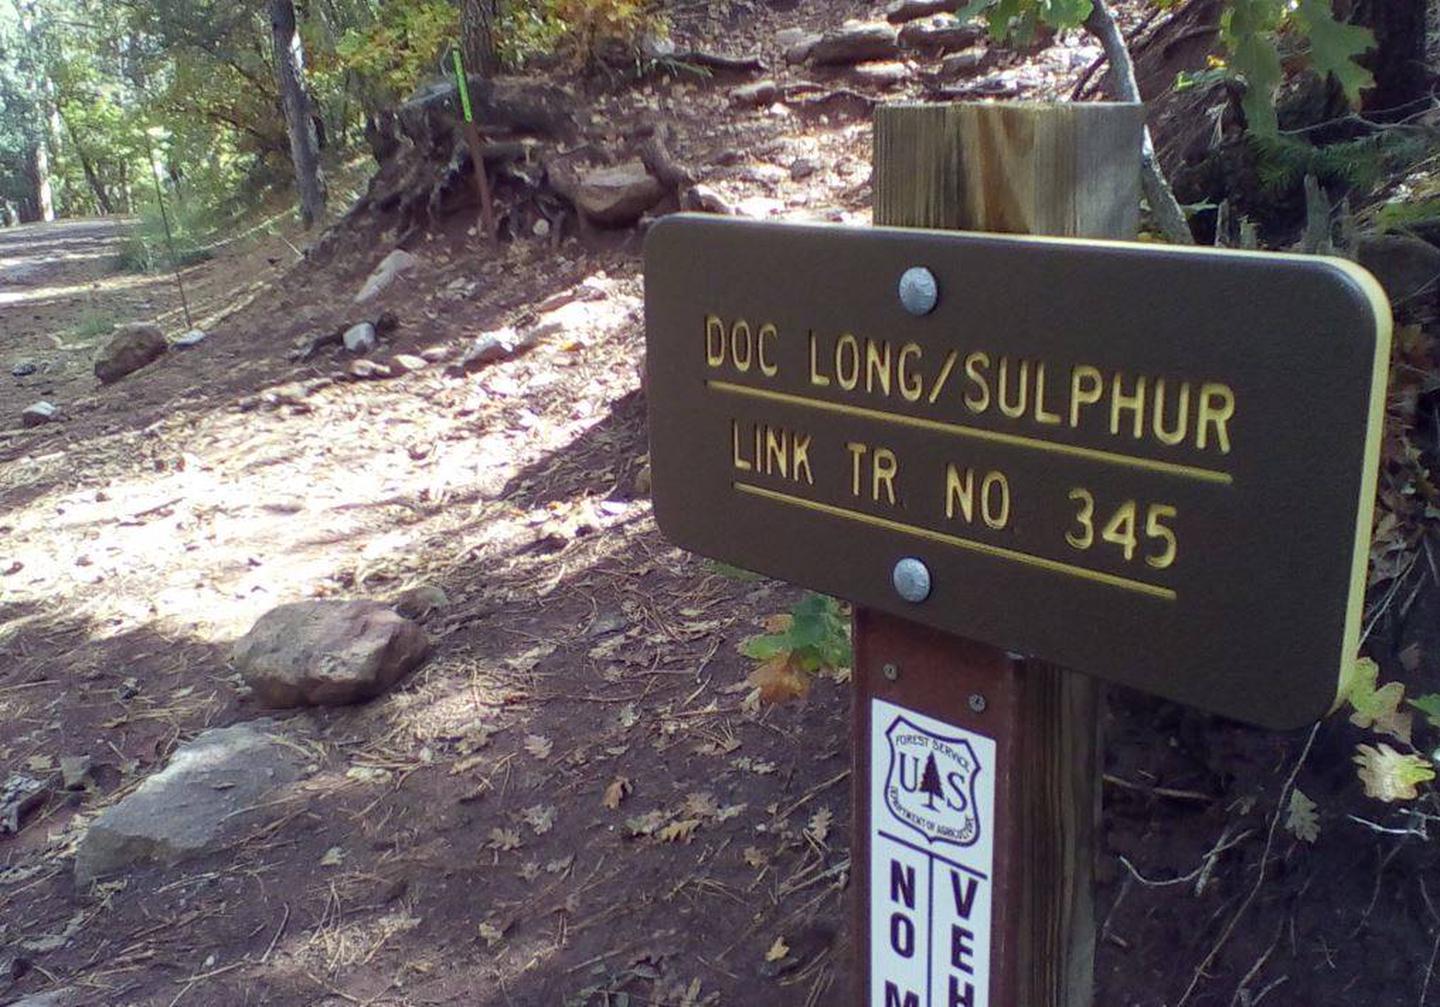 this is a picture of a trail sign directional trail sign linking Doc Long and Sulphur Picnic sites